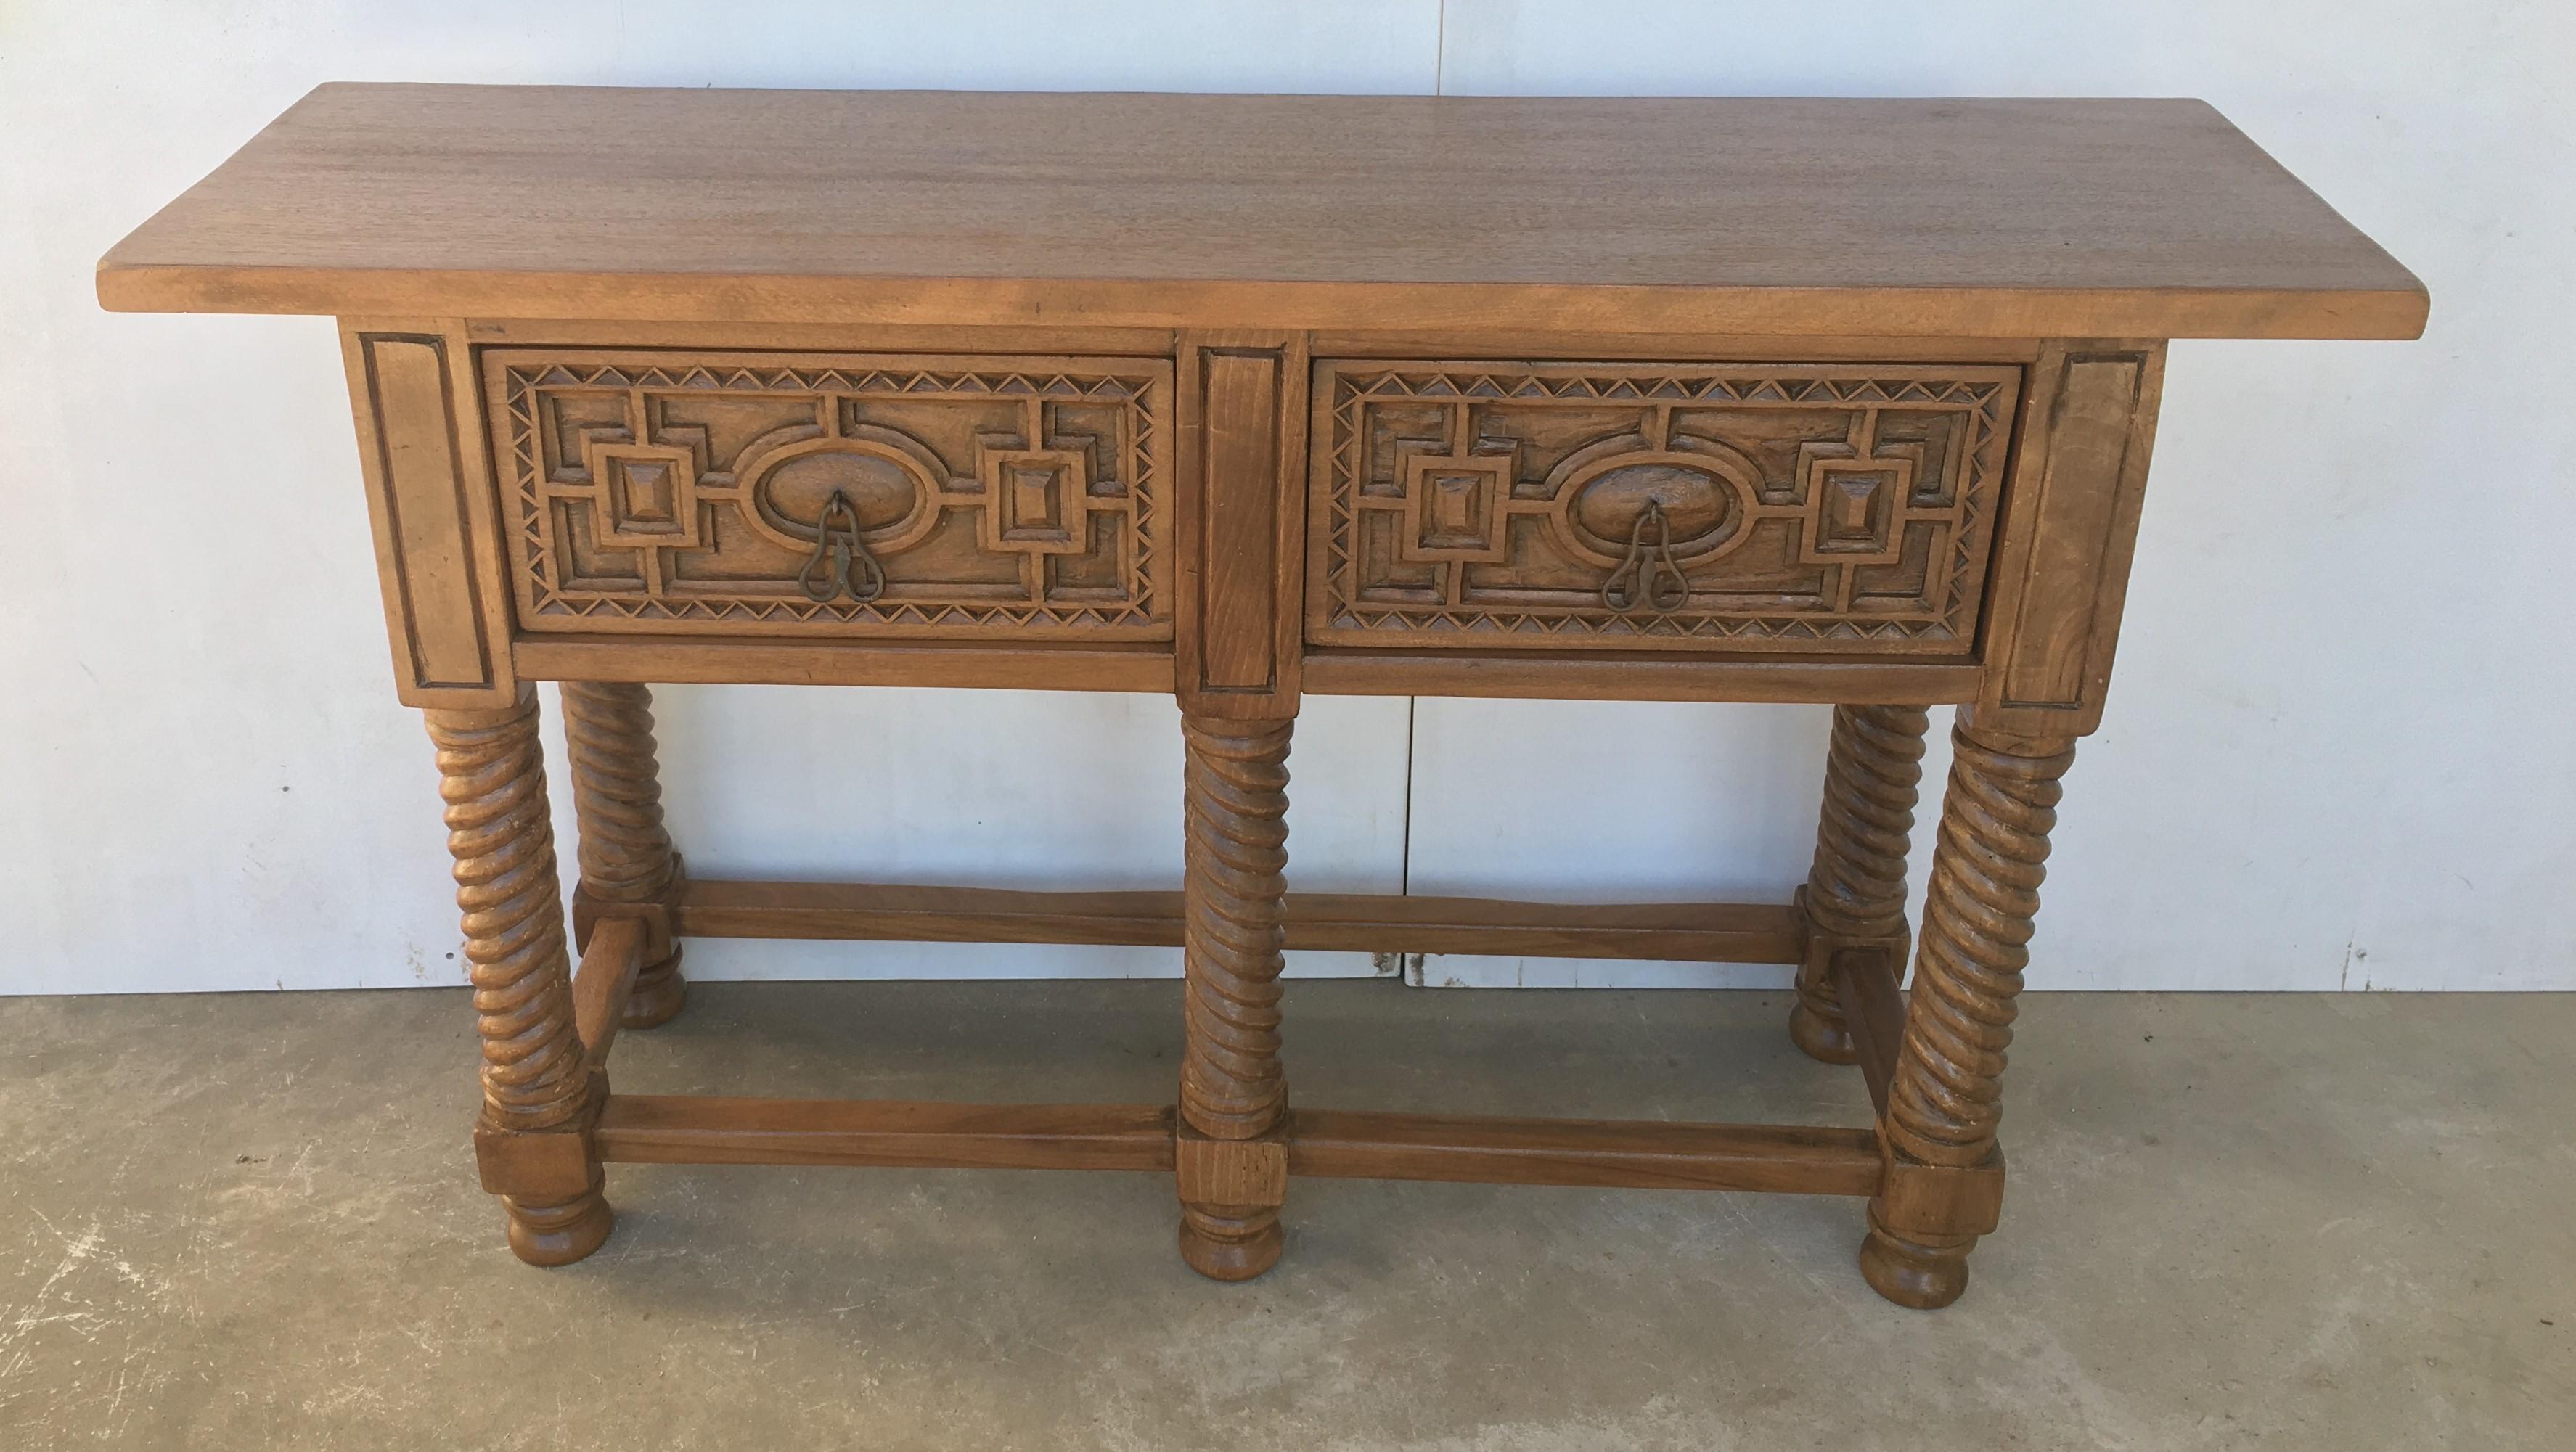 Early 19th Century Carved Walnut Wood Catalan Spanish Console Table im Zustand „Gut“ in Miami, FL